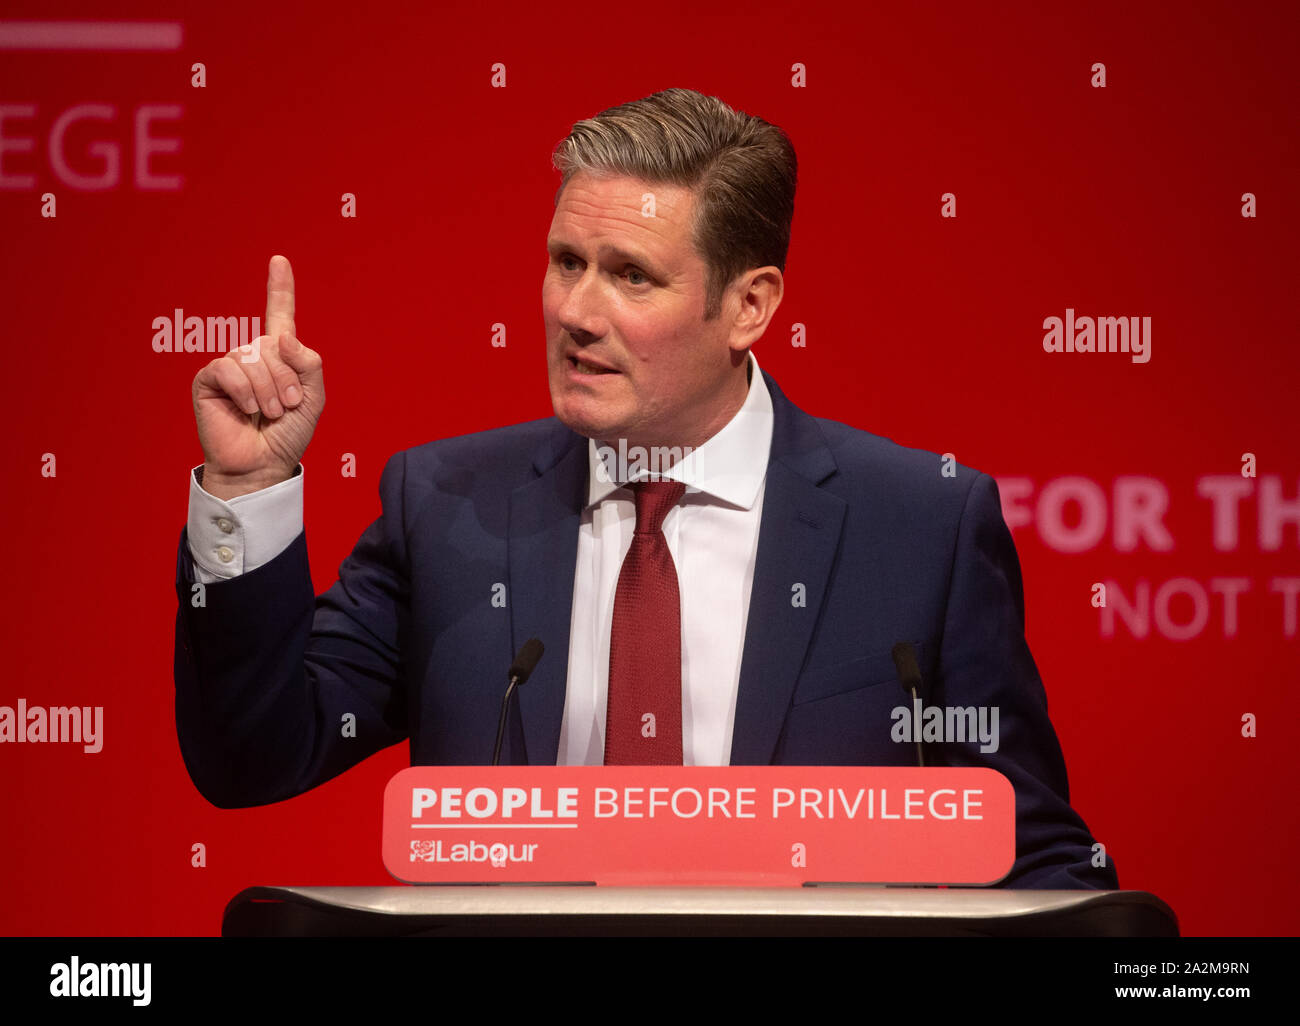 Sir Keir Starmer, Shadow Secretary of State for Exiting the European Union, gives his keynote speech at the Labour Party Conference in Brighton. Stock Photo